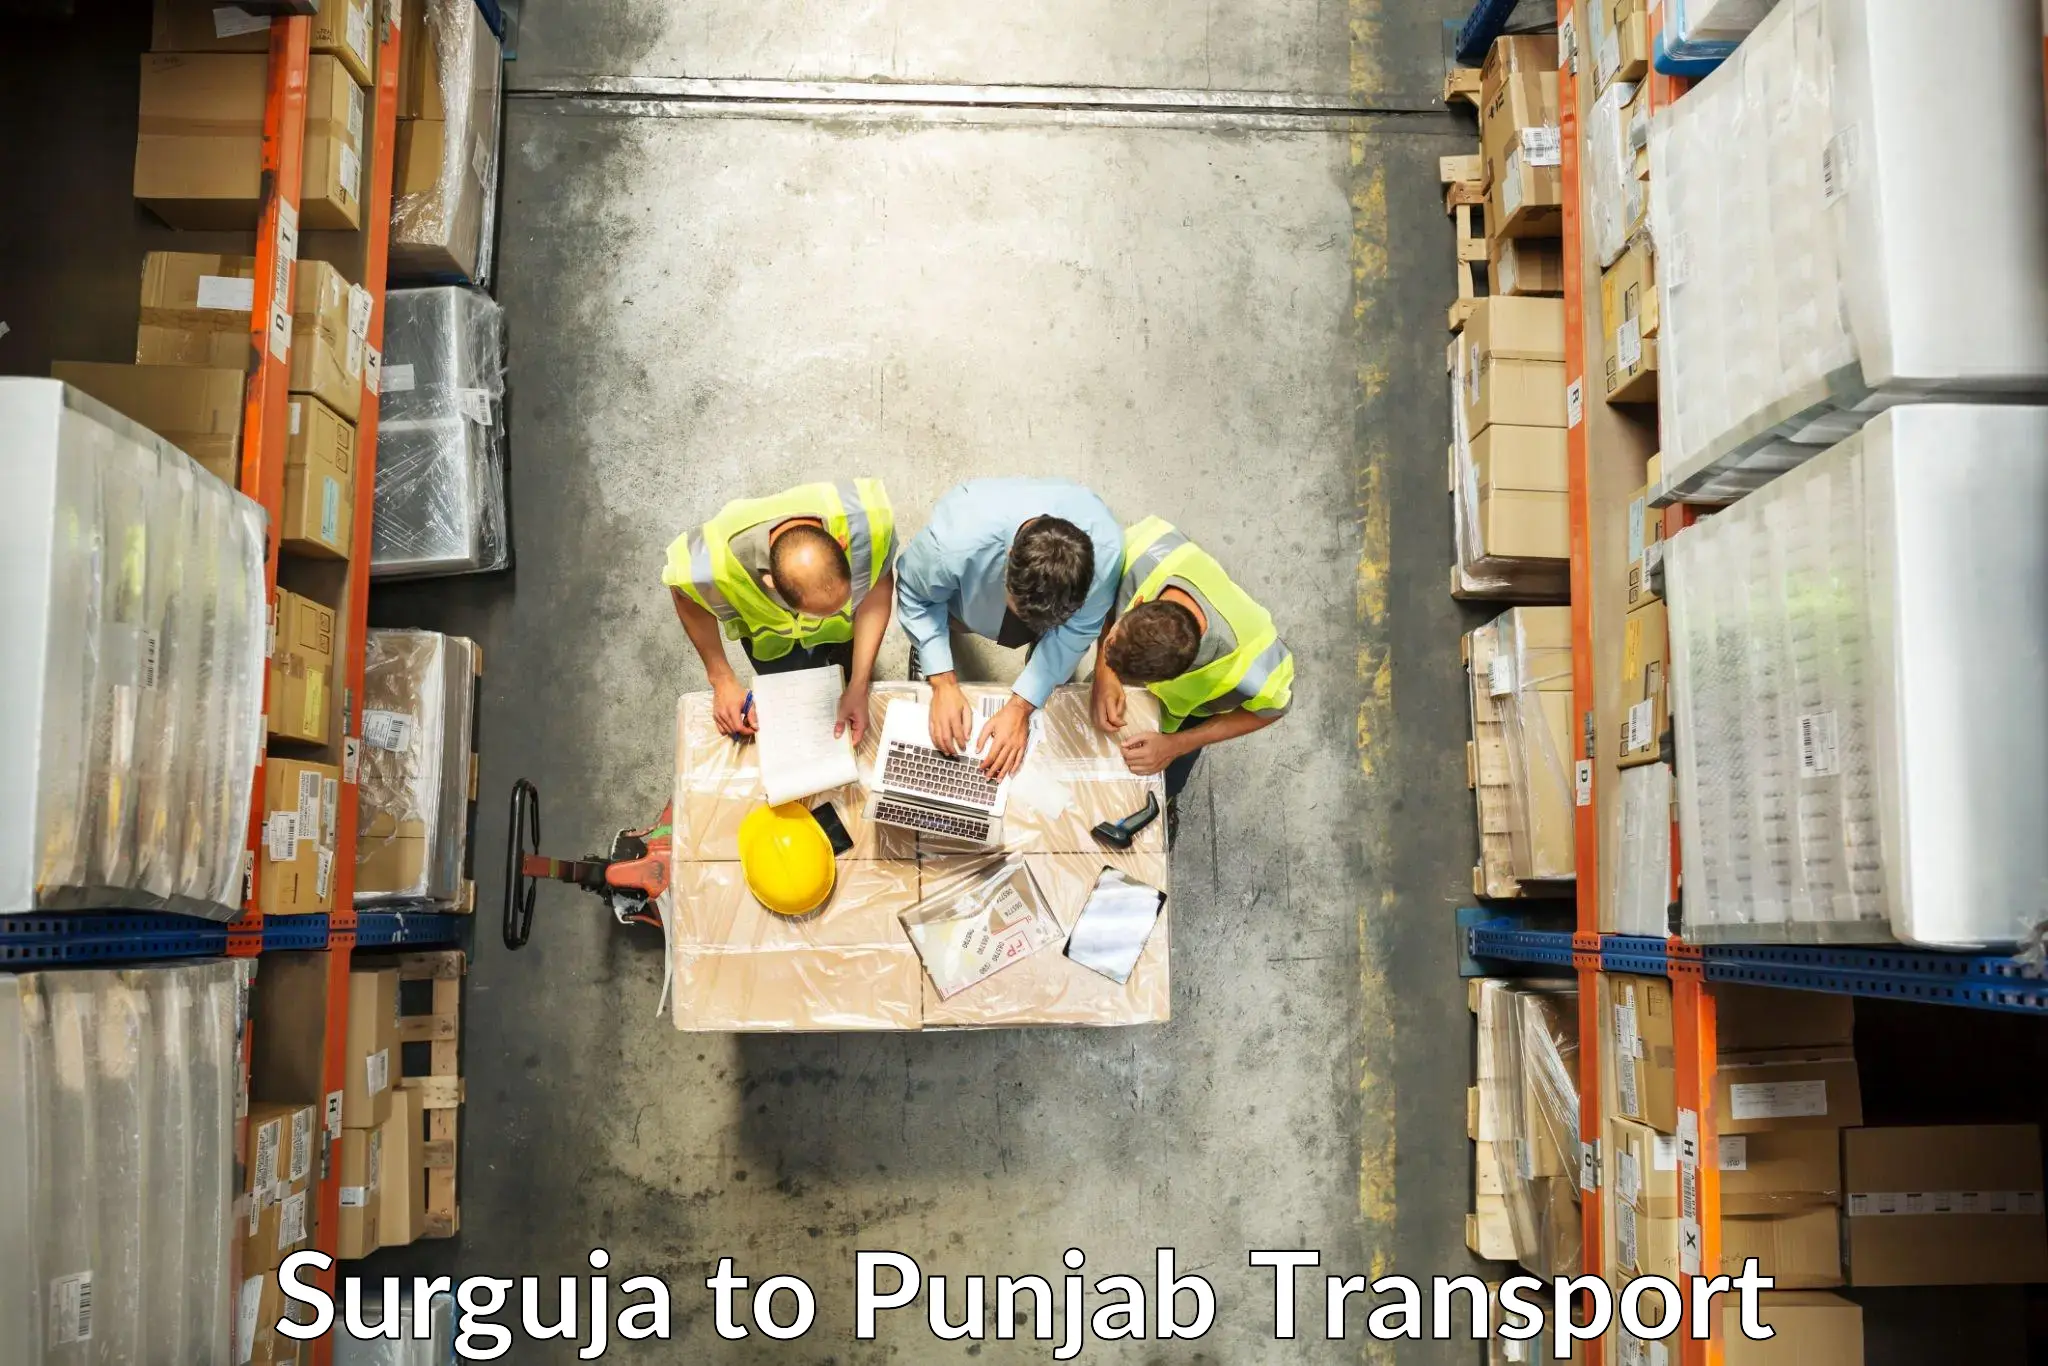 Container transport service Surguja to Goindwal Sahib